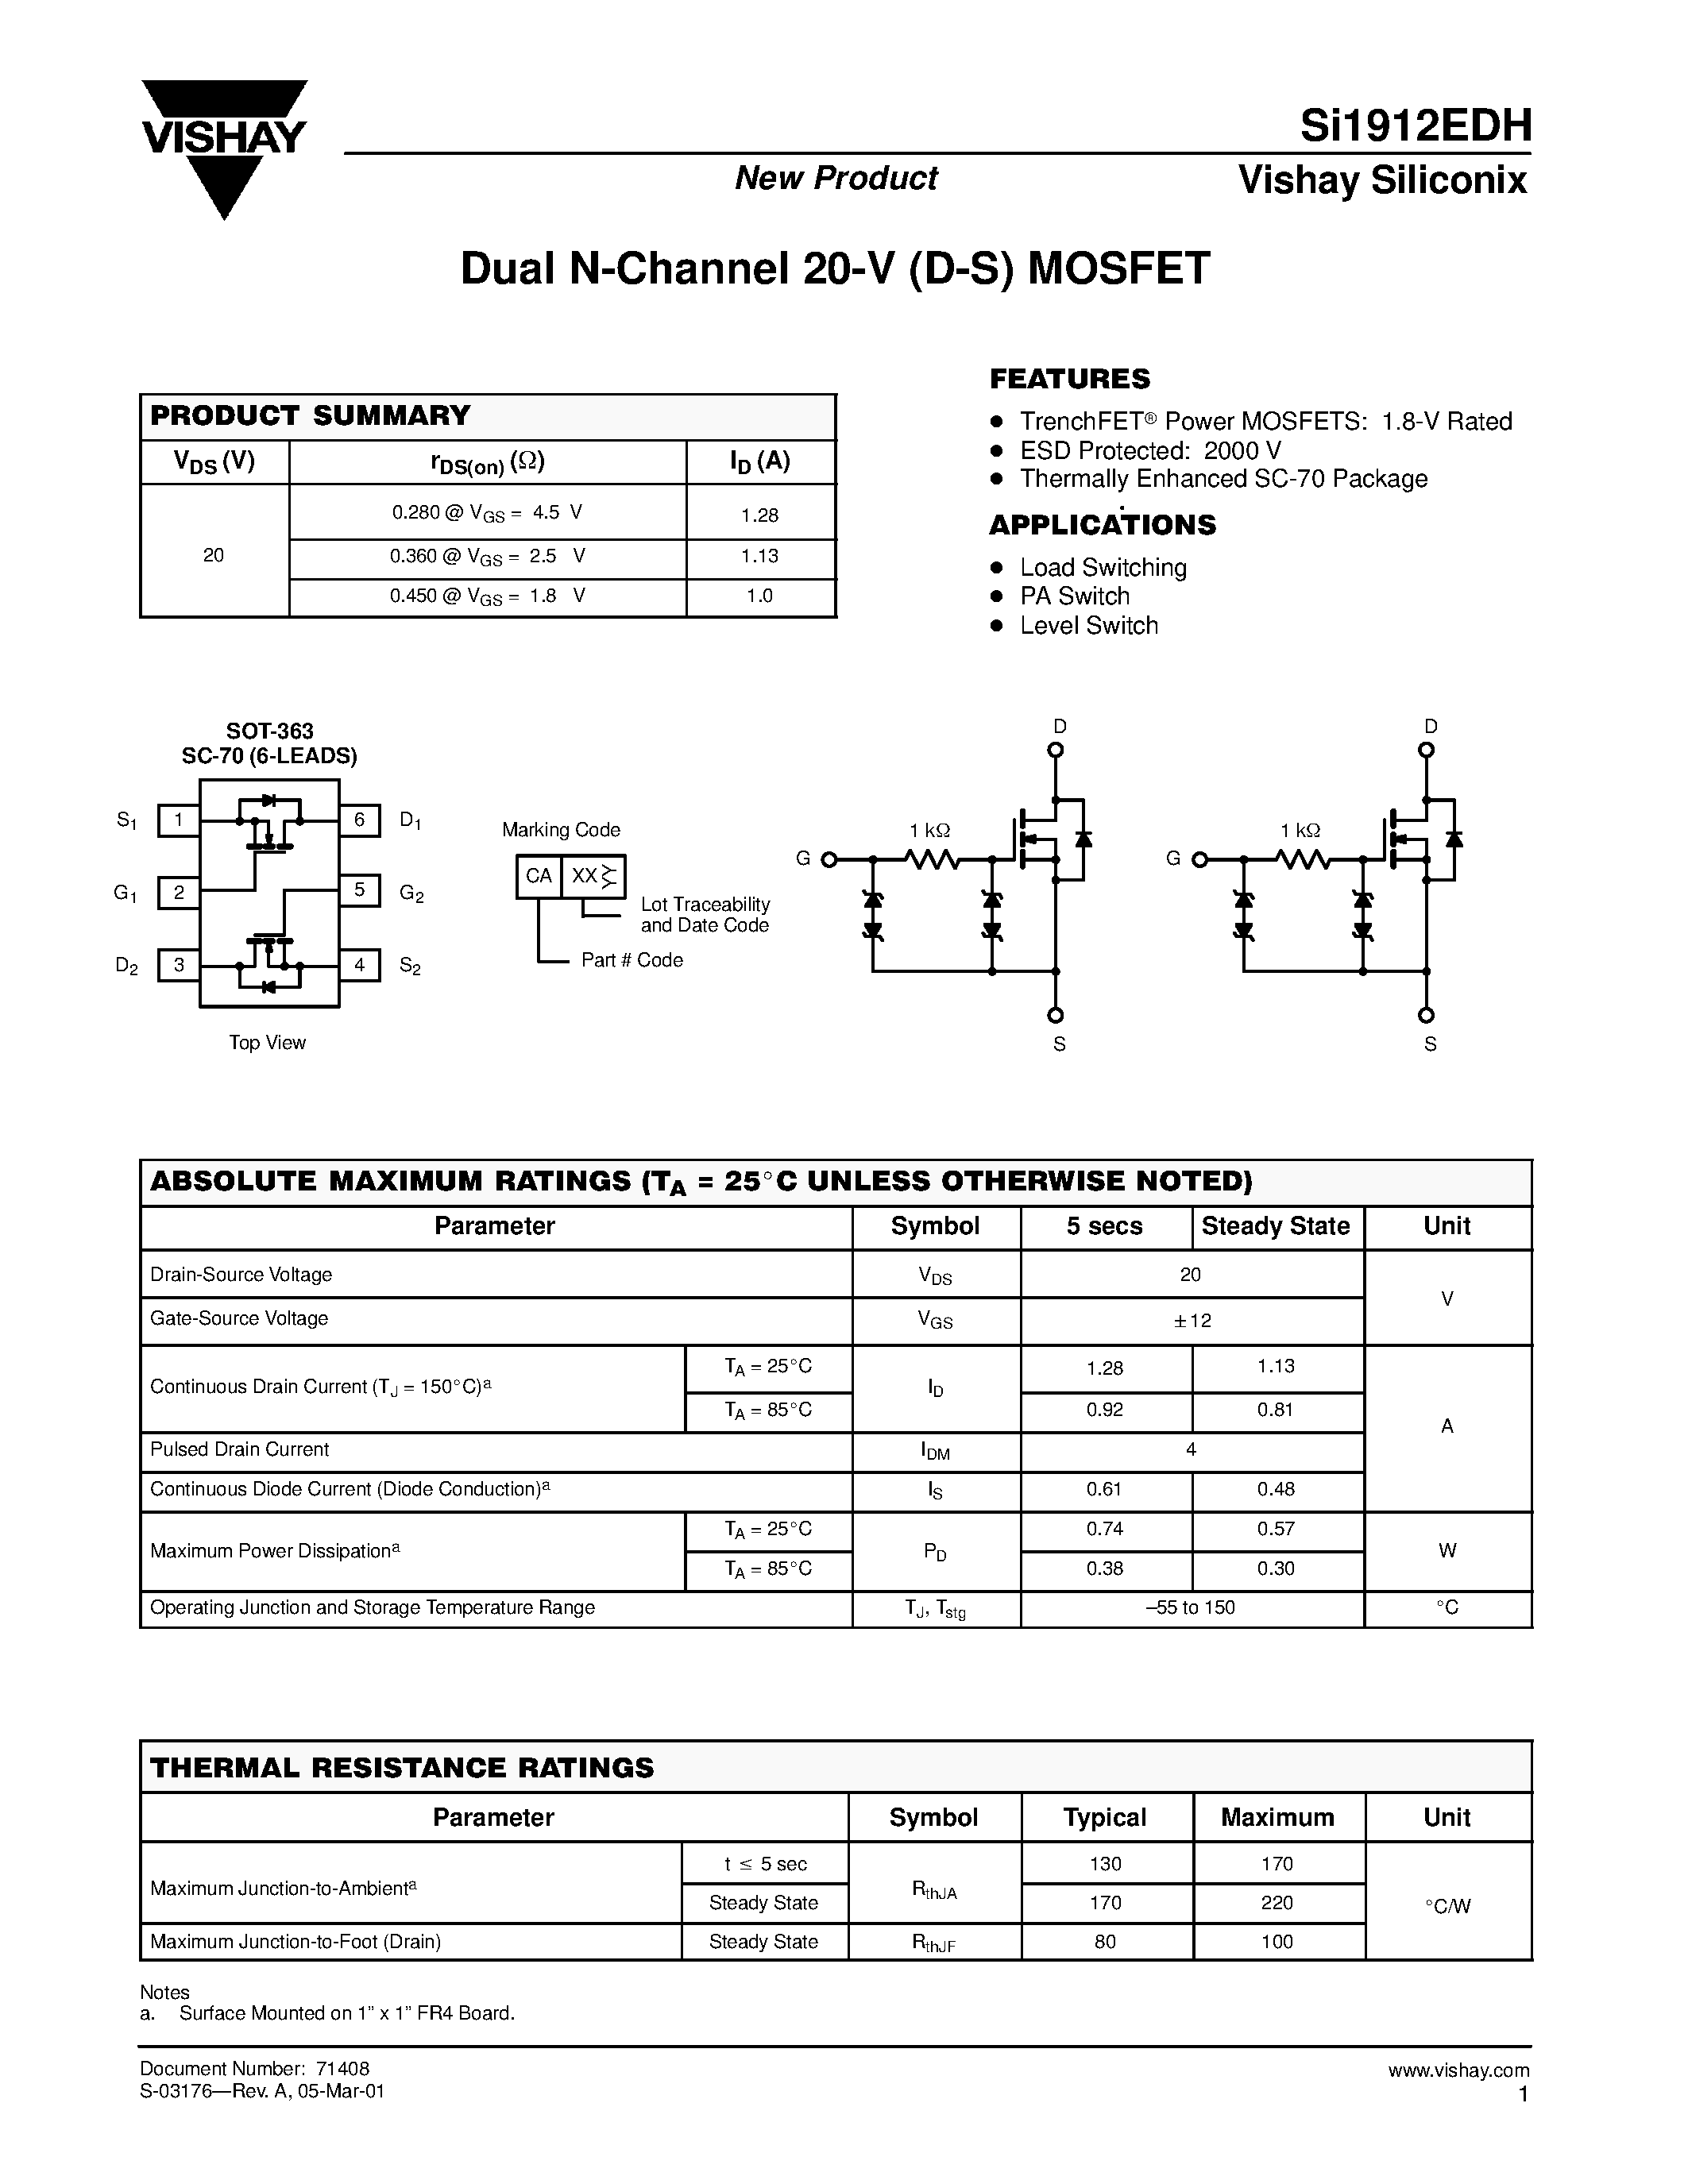 Datasheet SI1912EDH - Dual N-Channel 20-V (D-S) MOSFET page 1